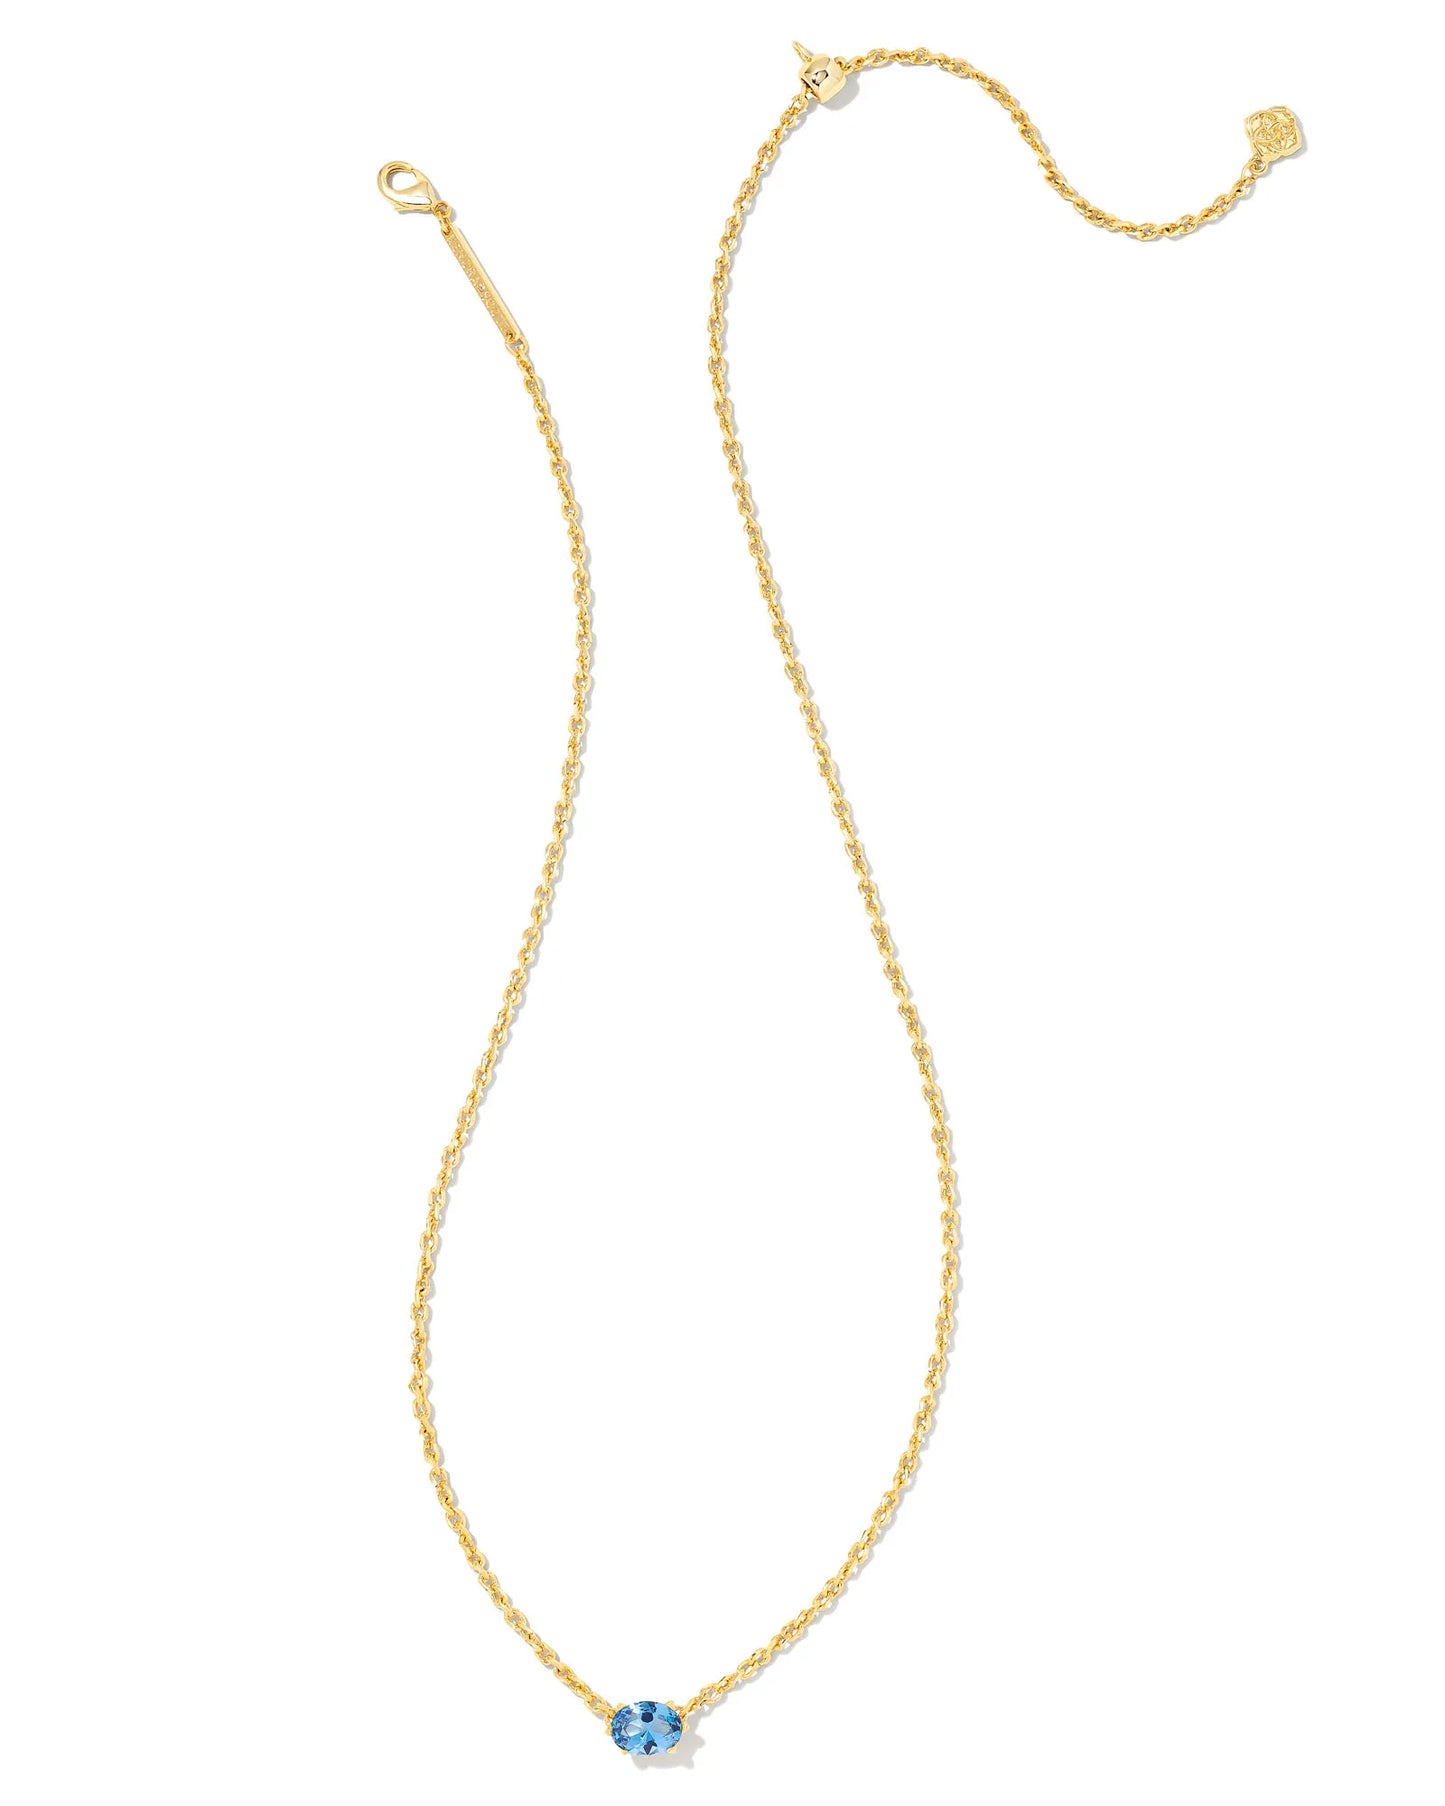 Kendra Scott Cailin Crystal Pendant Necklace Gold Blue Violet Crystal-Necklaces-Kendra Scott-N1941GLD-The Twisted Chandelier